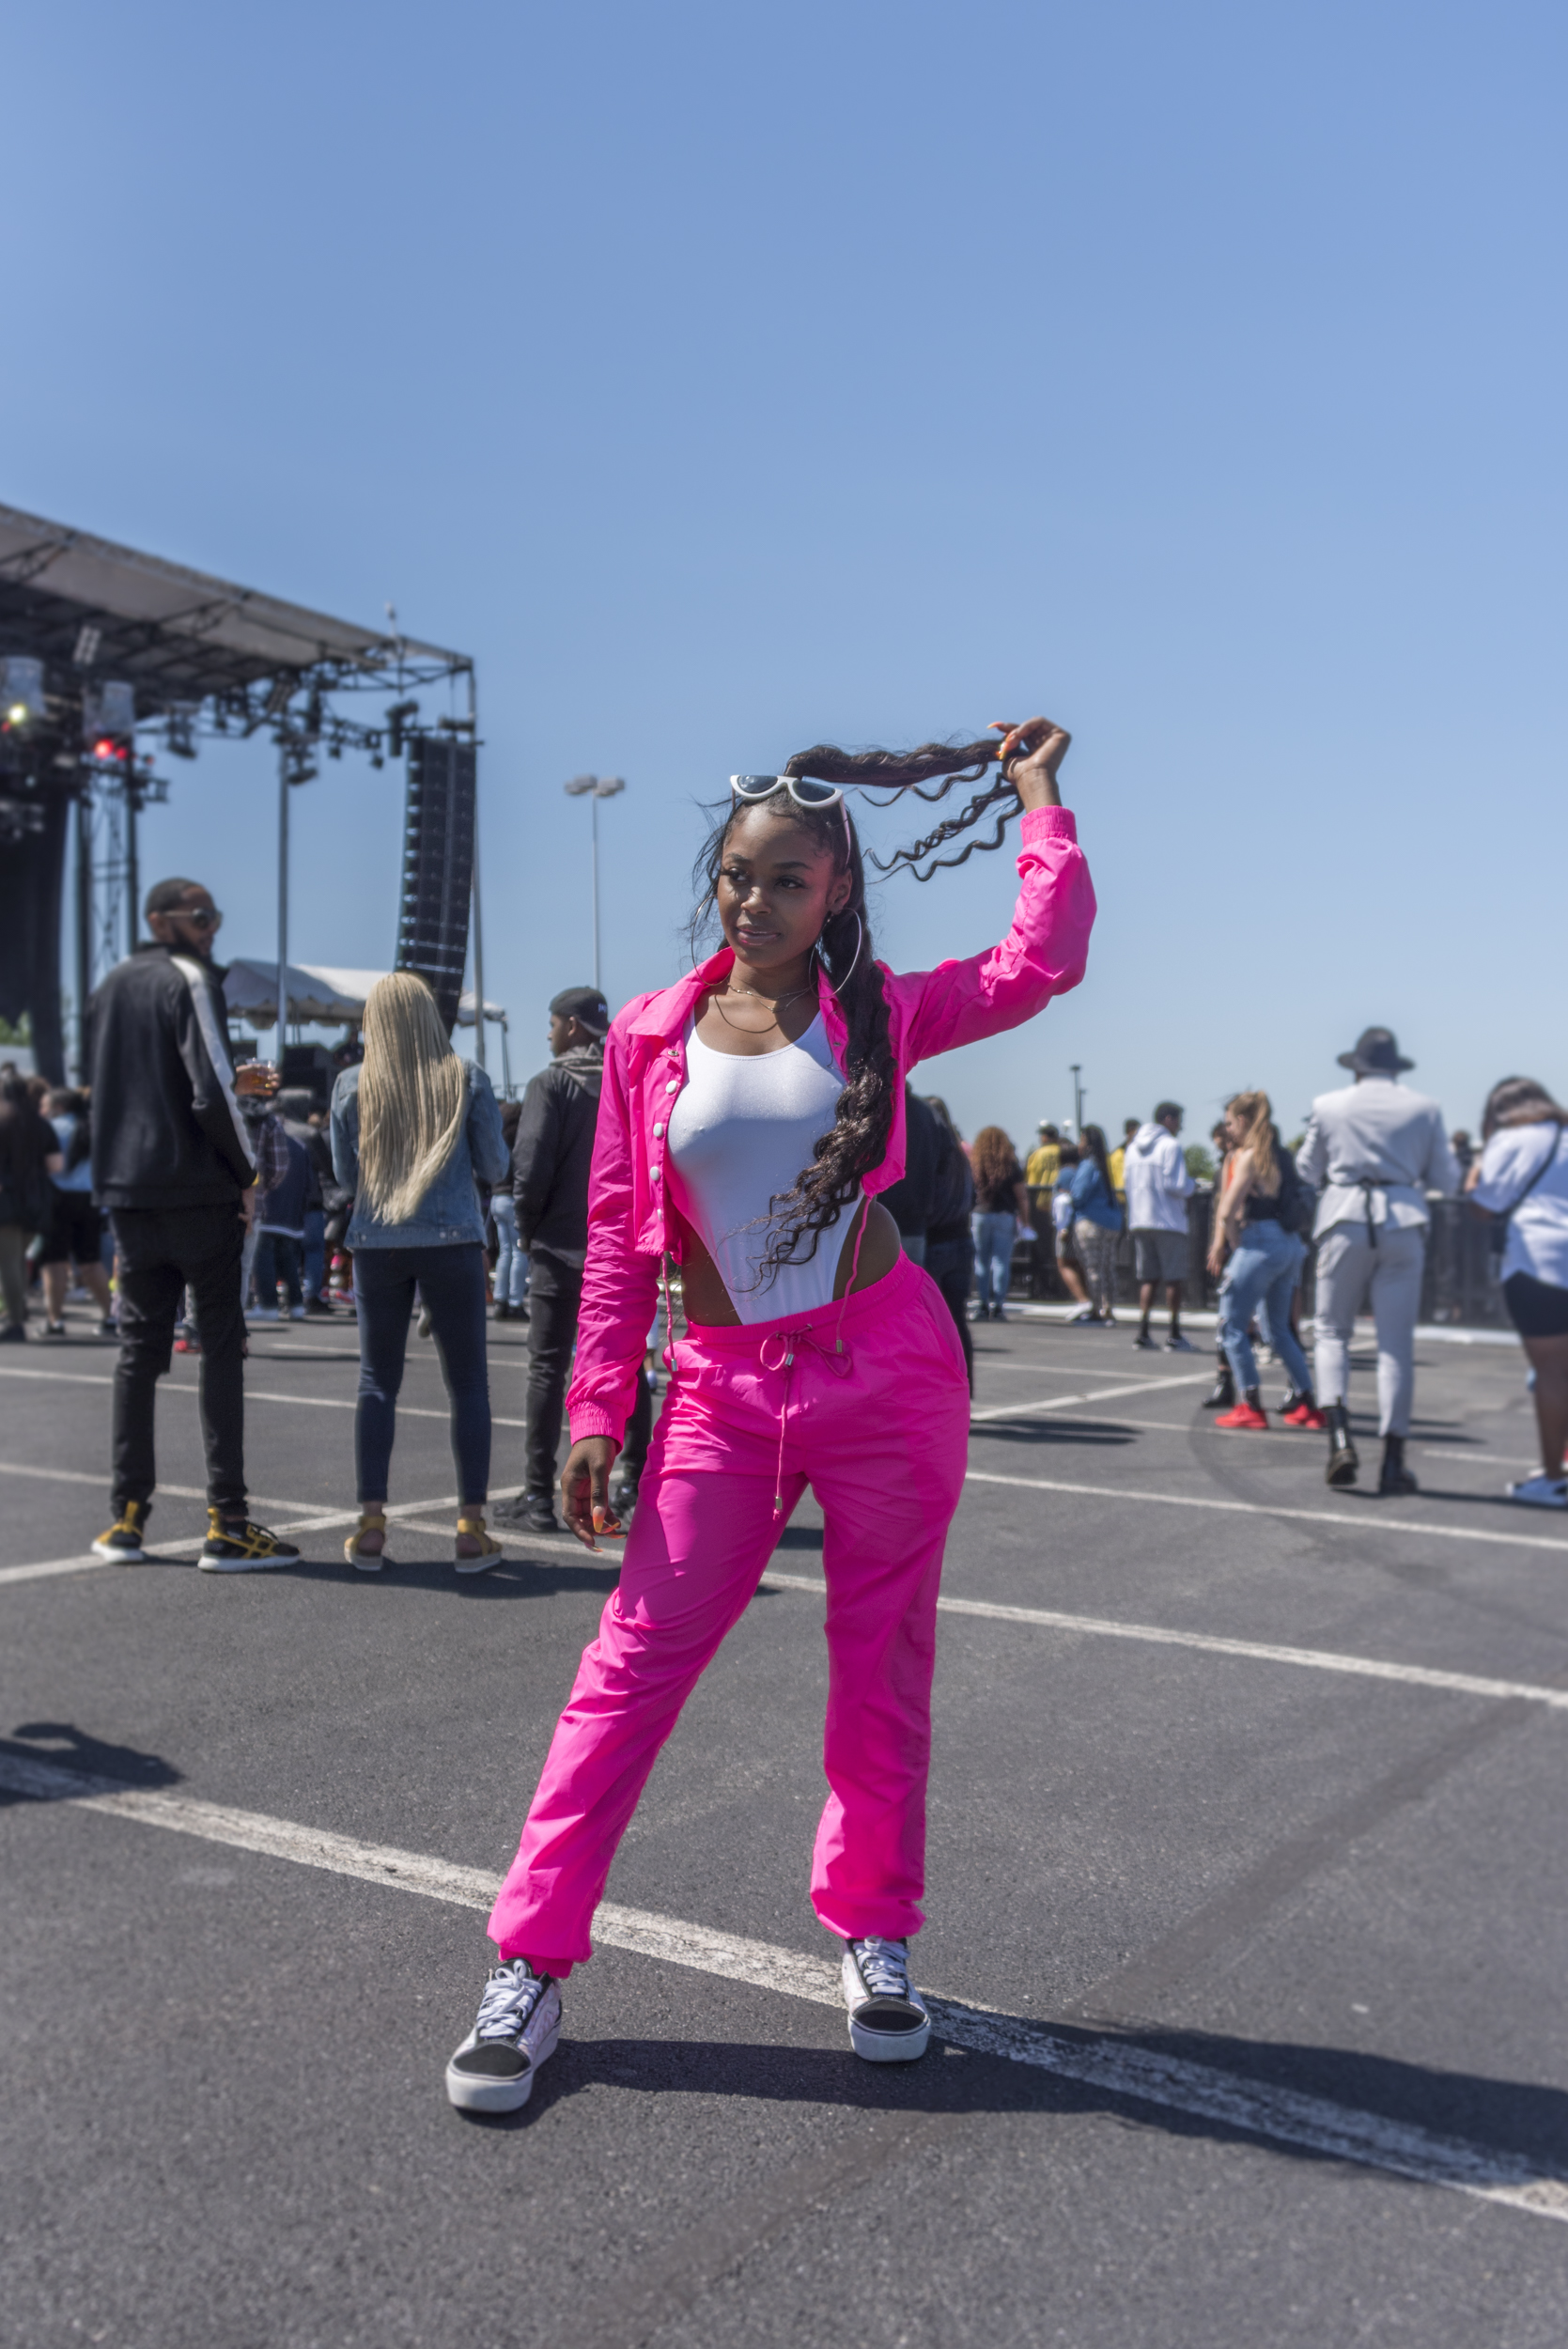 The 17 Best-Dressed People We Saw at the 2019 Broccoli City Festival